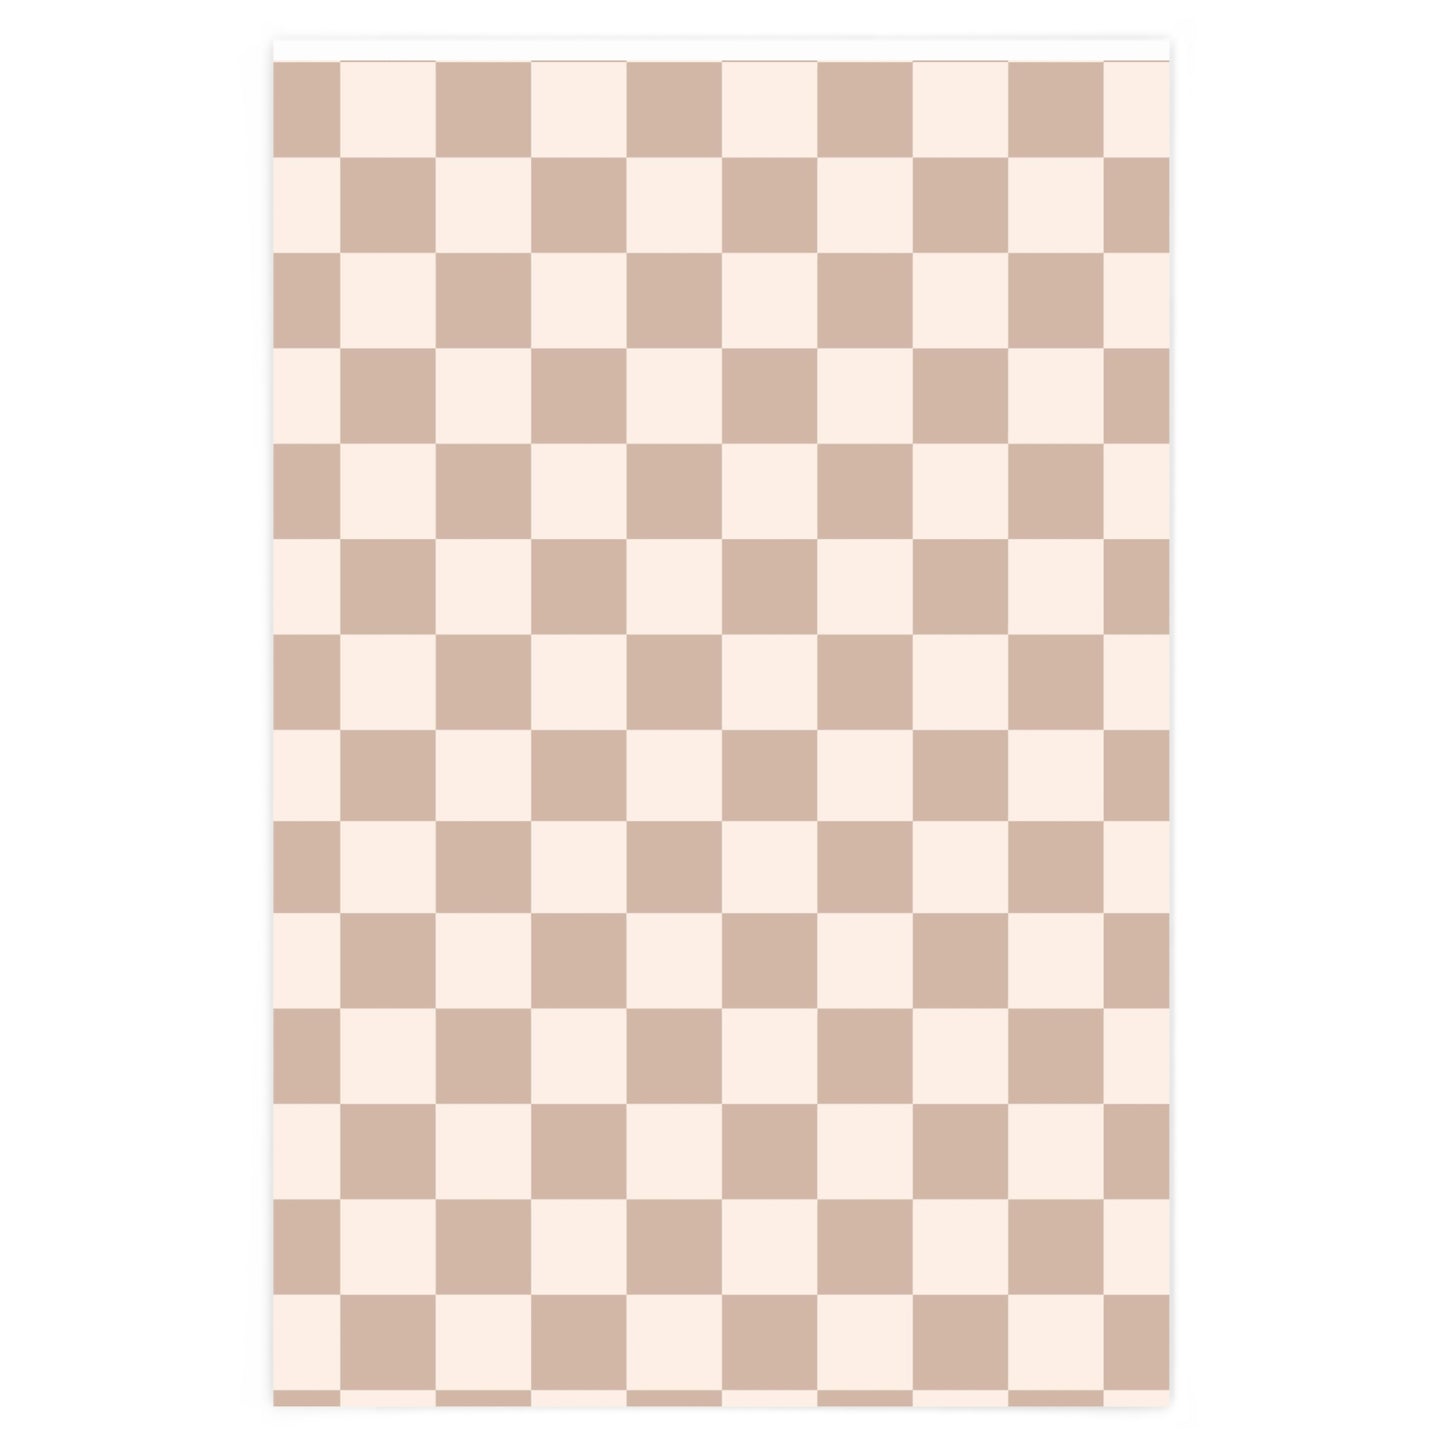 Neutral Check | Wrapping Paper Sheet 24" × 36"